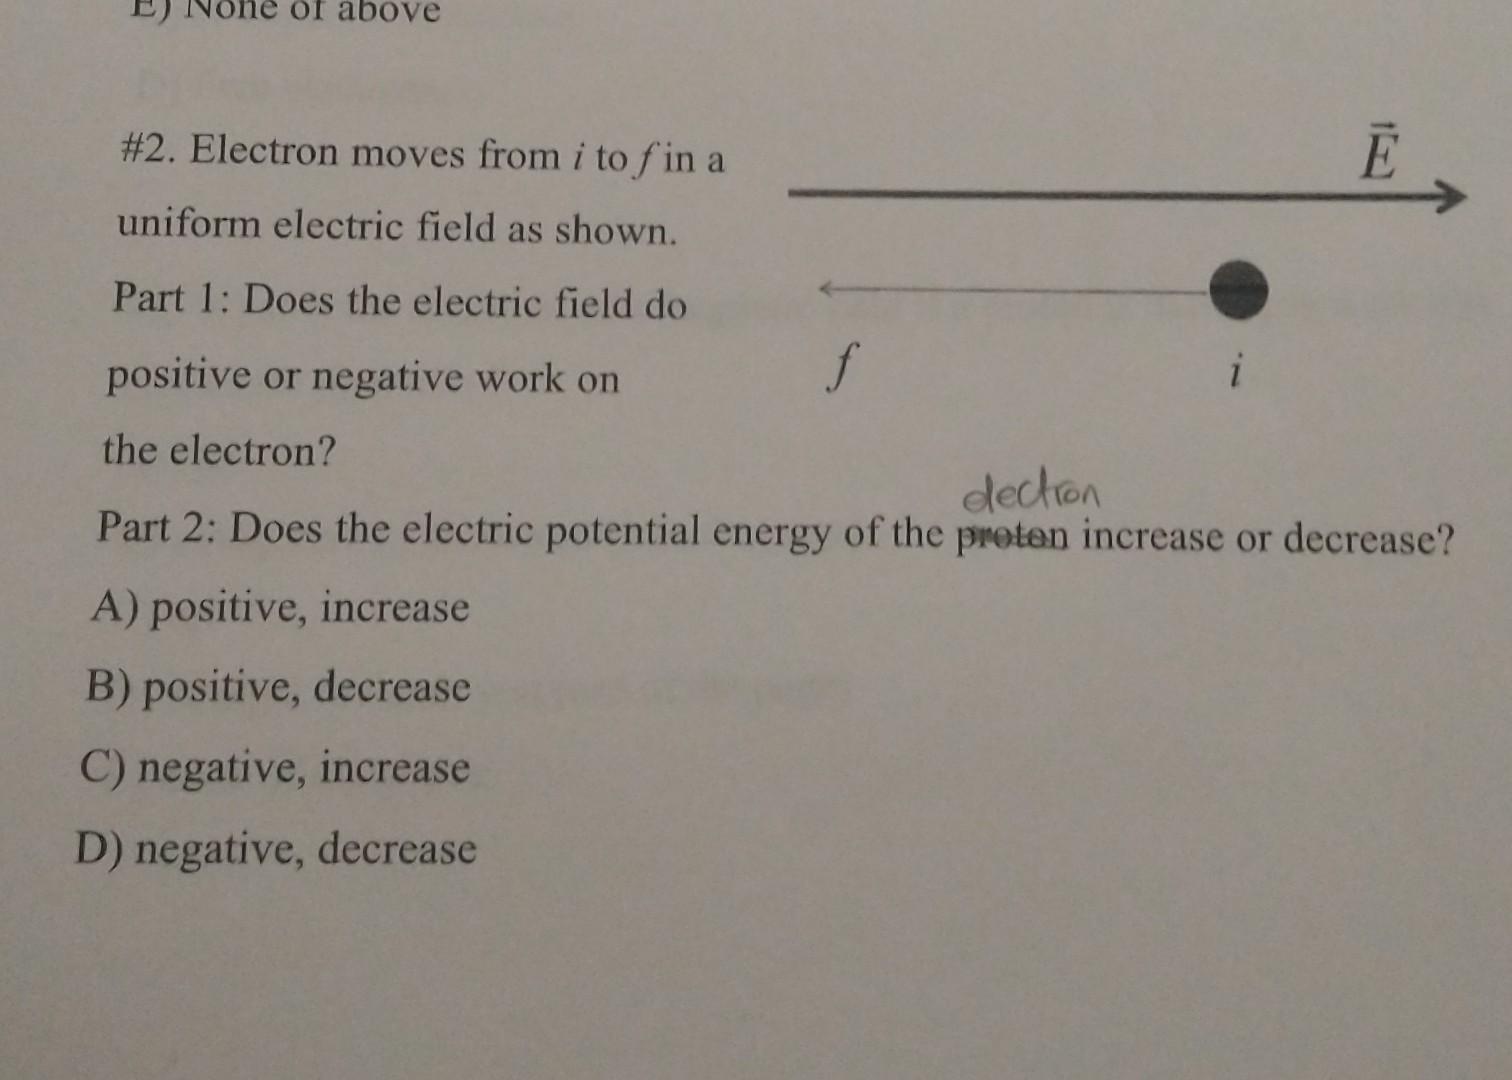 how does the electric potential energy change as the electron moves from i to f?